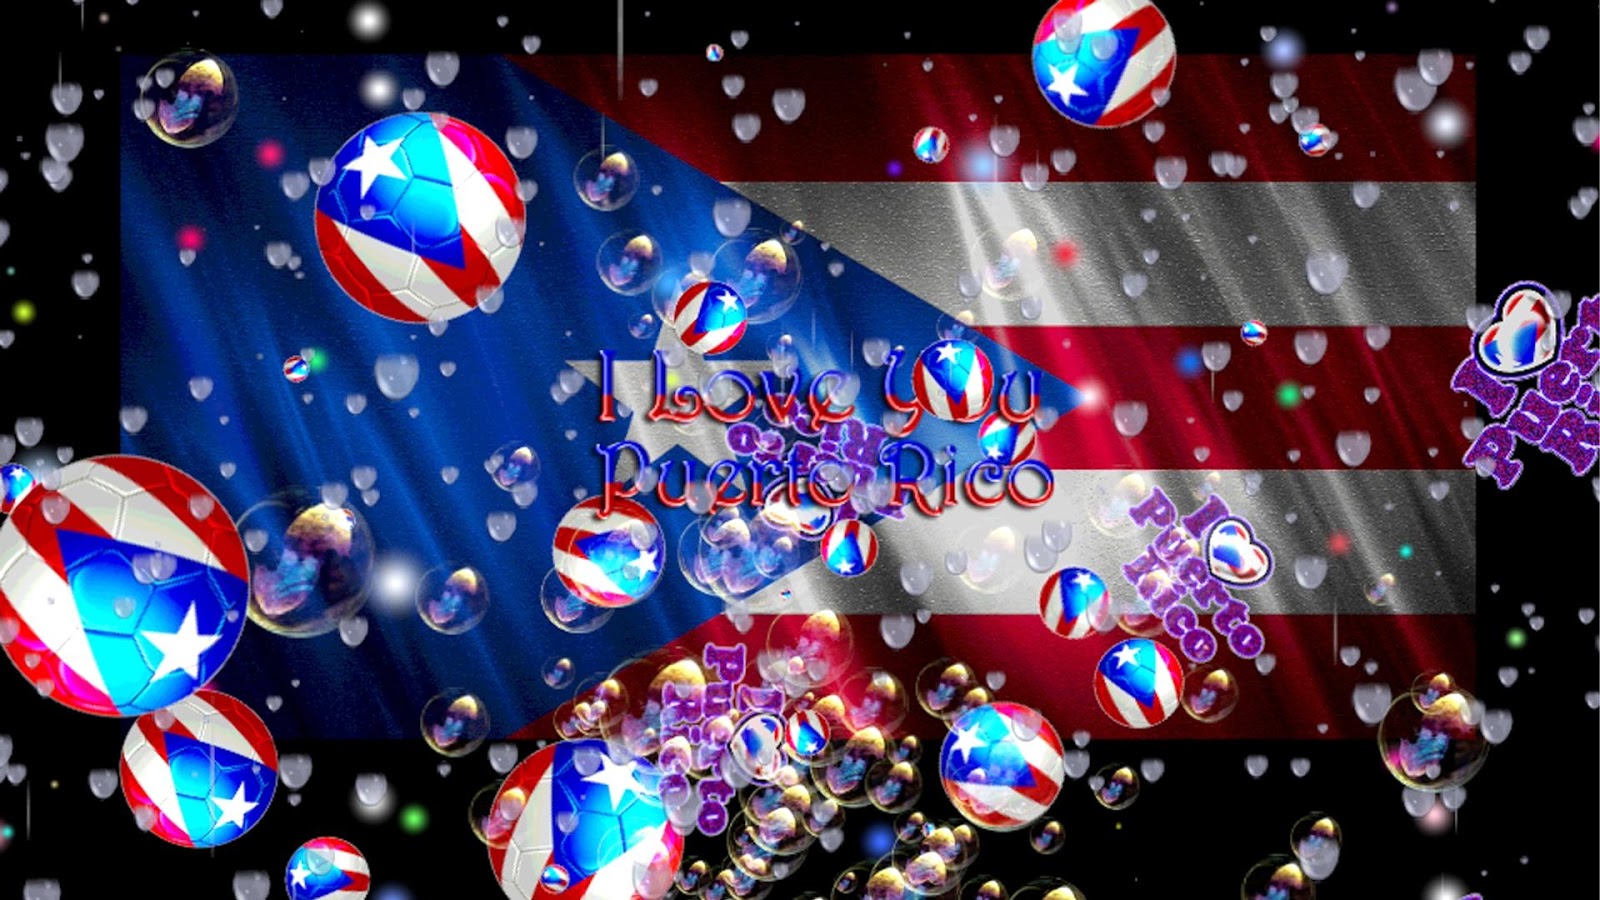 Puerto Rico Flag Love - Android Apps on Google Play